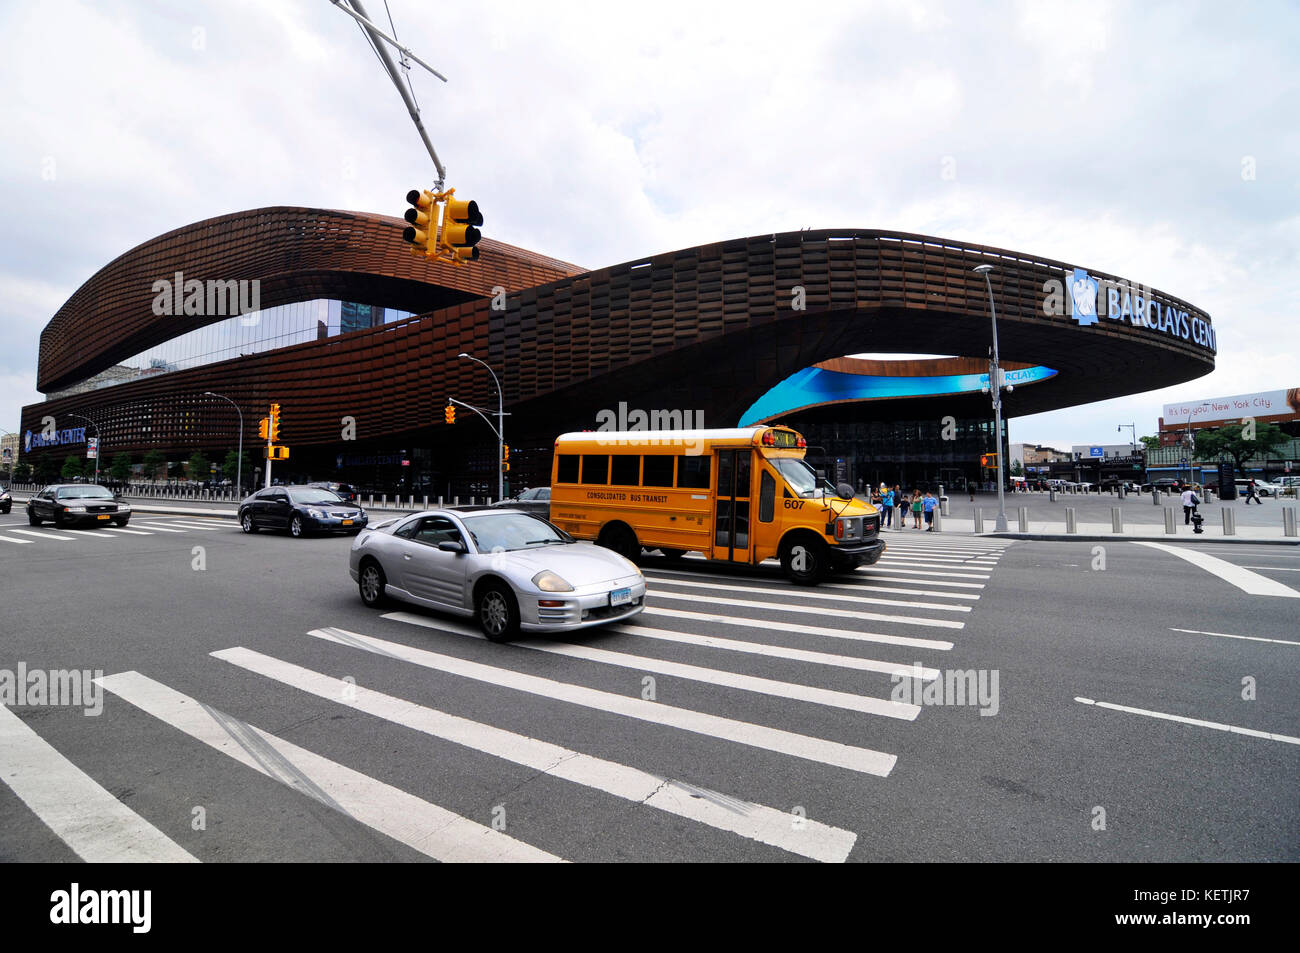 The Barclay's Center in Brooklyn, New York. Stock Photo